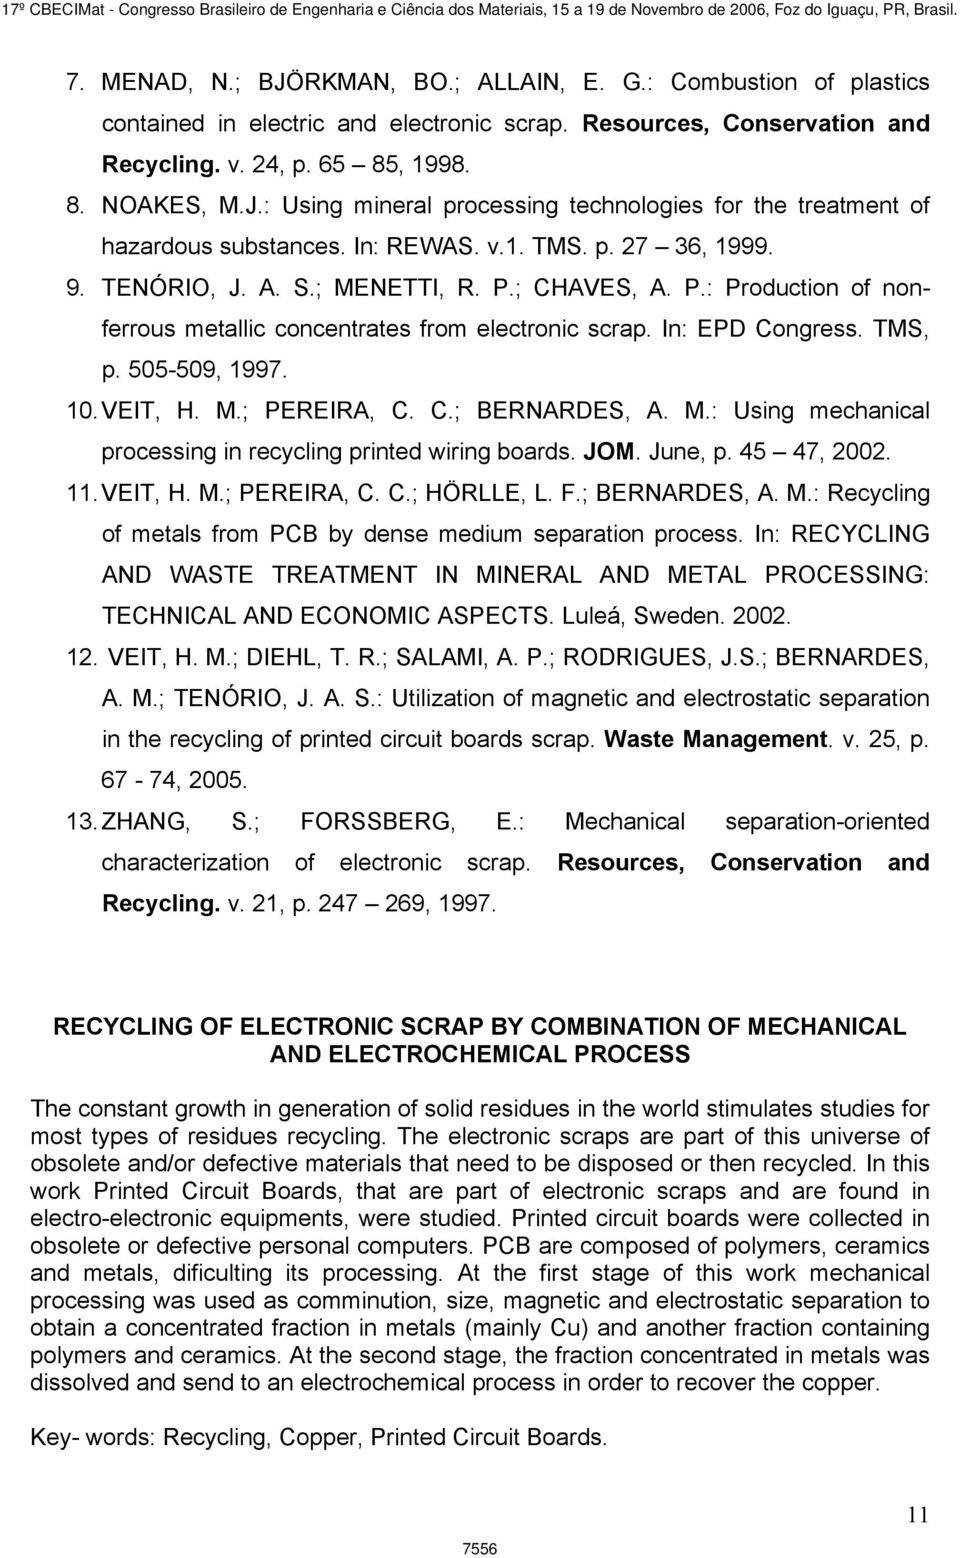 1. VEIT, H. M.; PEREIRA, C. C.; BERNARDES, A. M.: Using mechanical processing in recycling printed wiring boards. JOM. June, p. 45 47, 22. 11. VEIT, H. M.; PEREIRA, C. C.; HÖRLLE, L. F.; BERNARDES, A. M.: Recycling of metals from PCB by dense medium separation process.